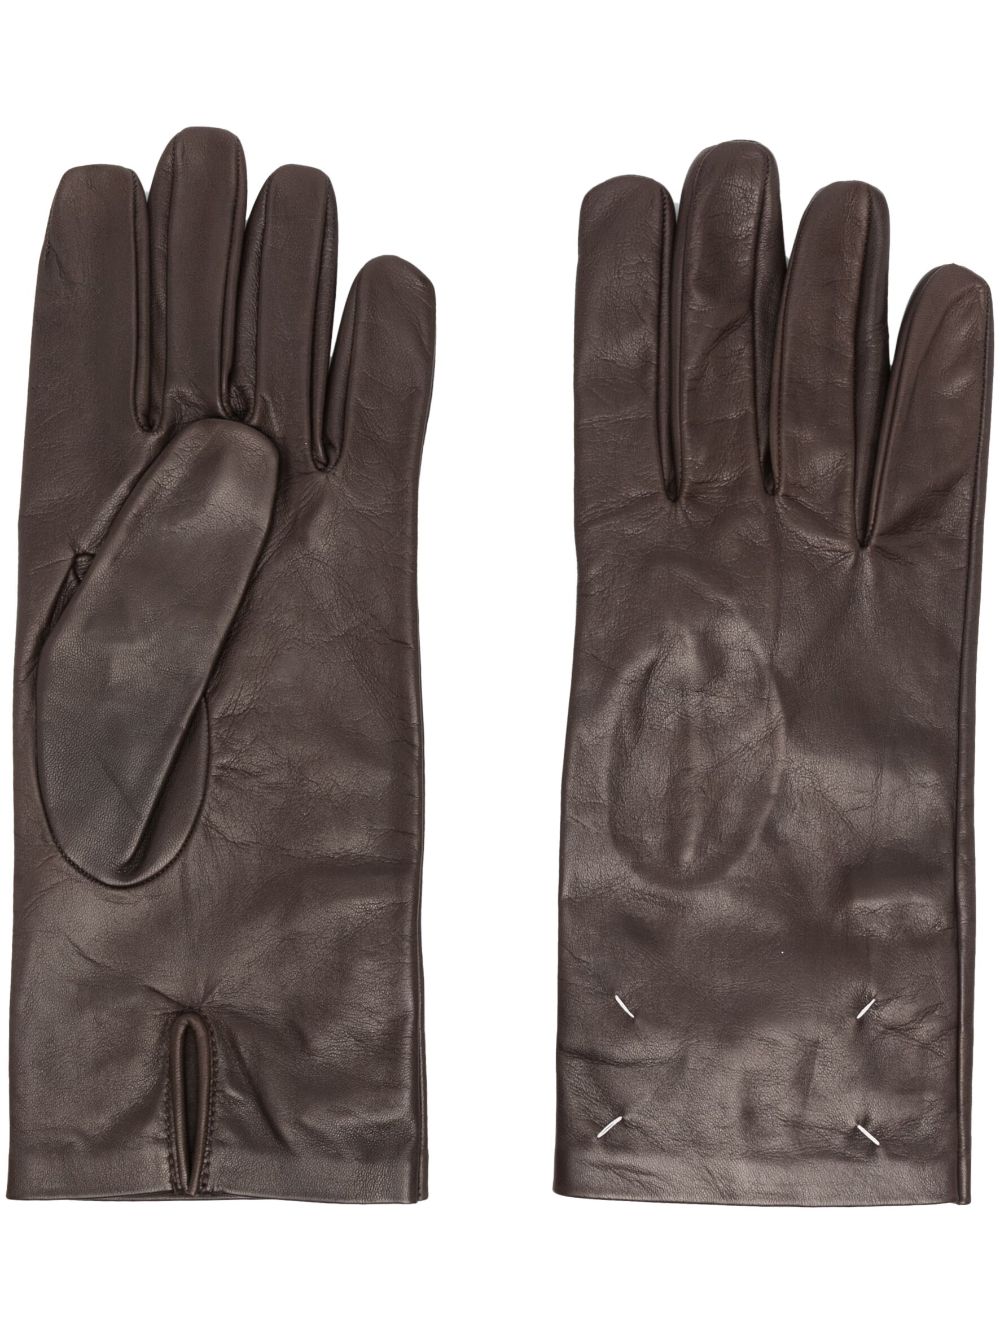 four-stitch leather gloves